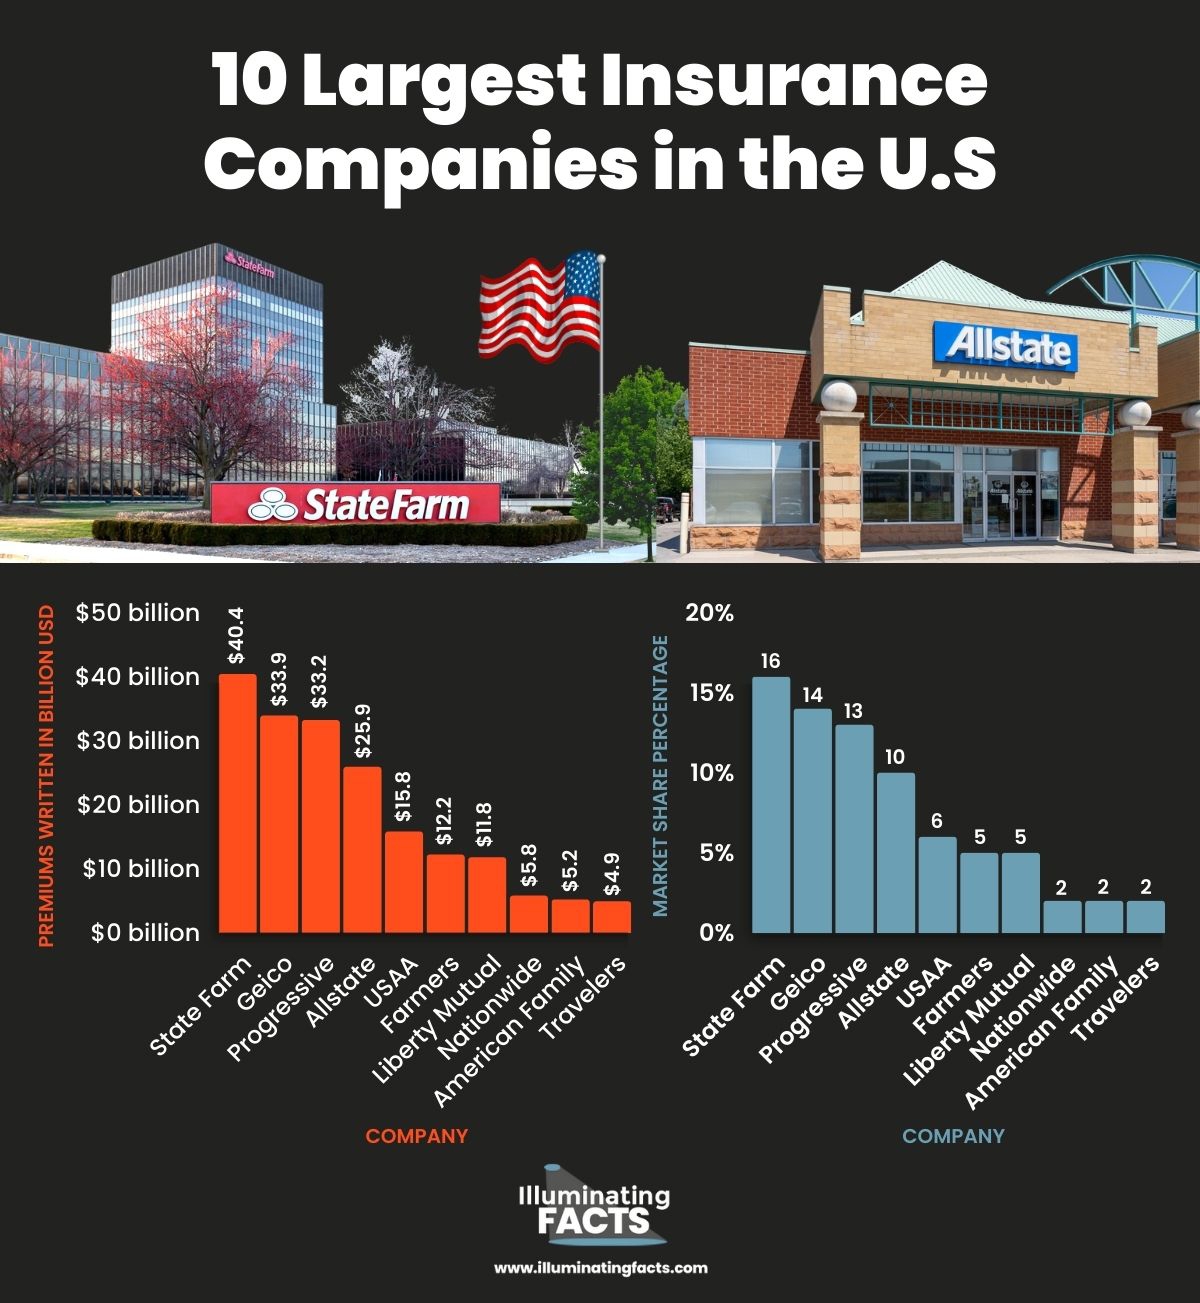 10 largest insurance companies in the U.S